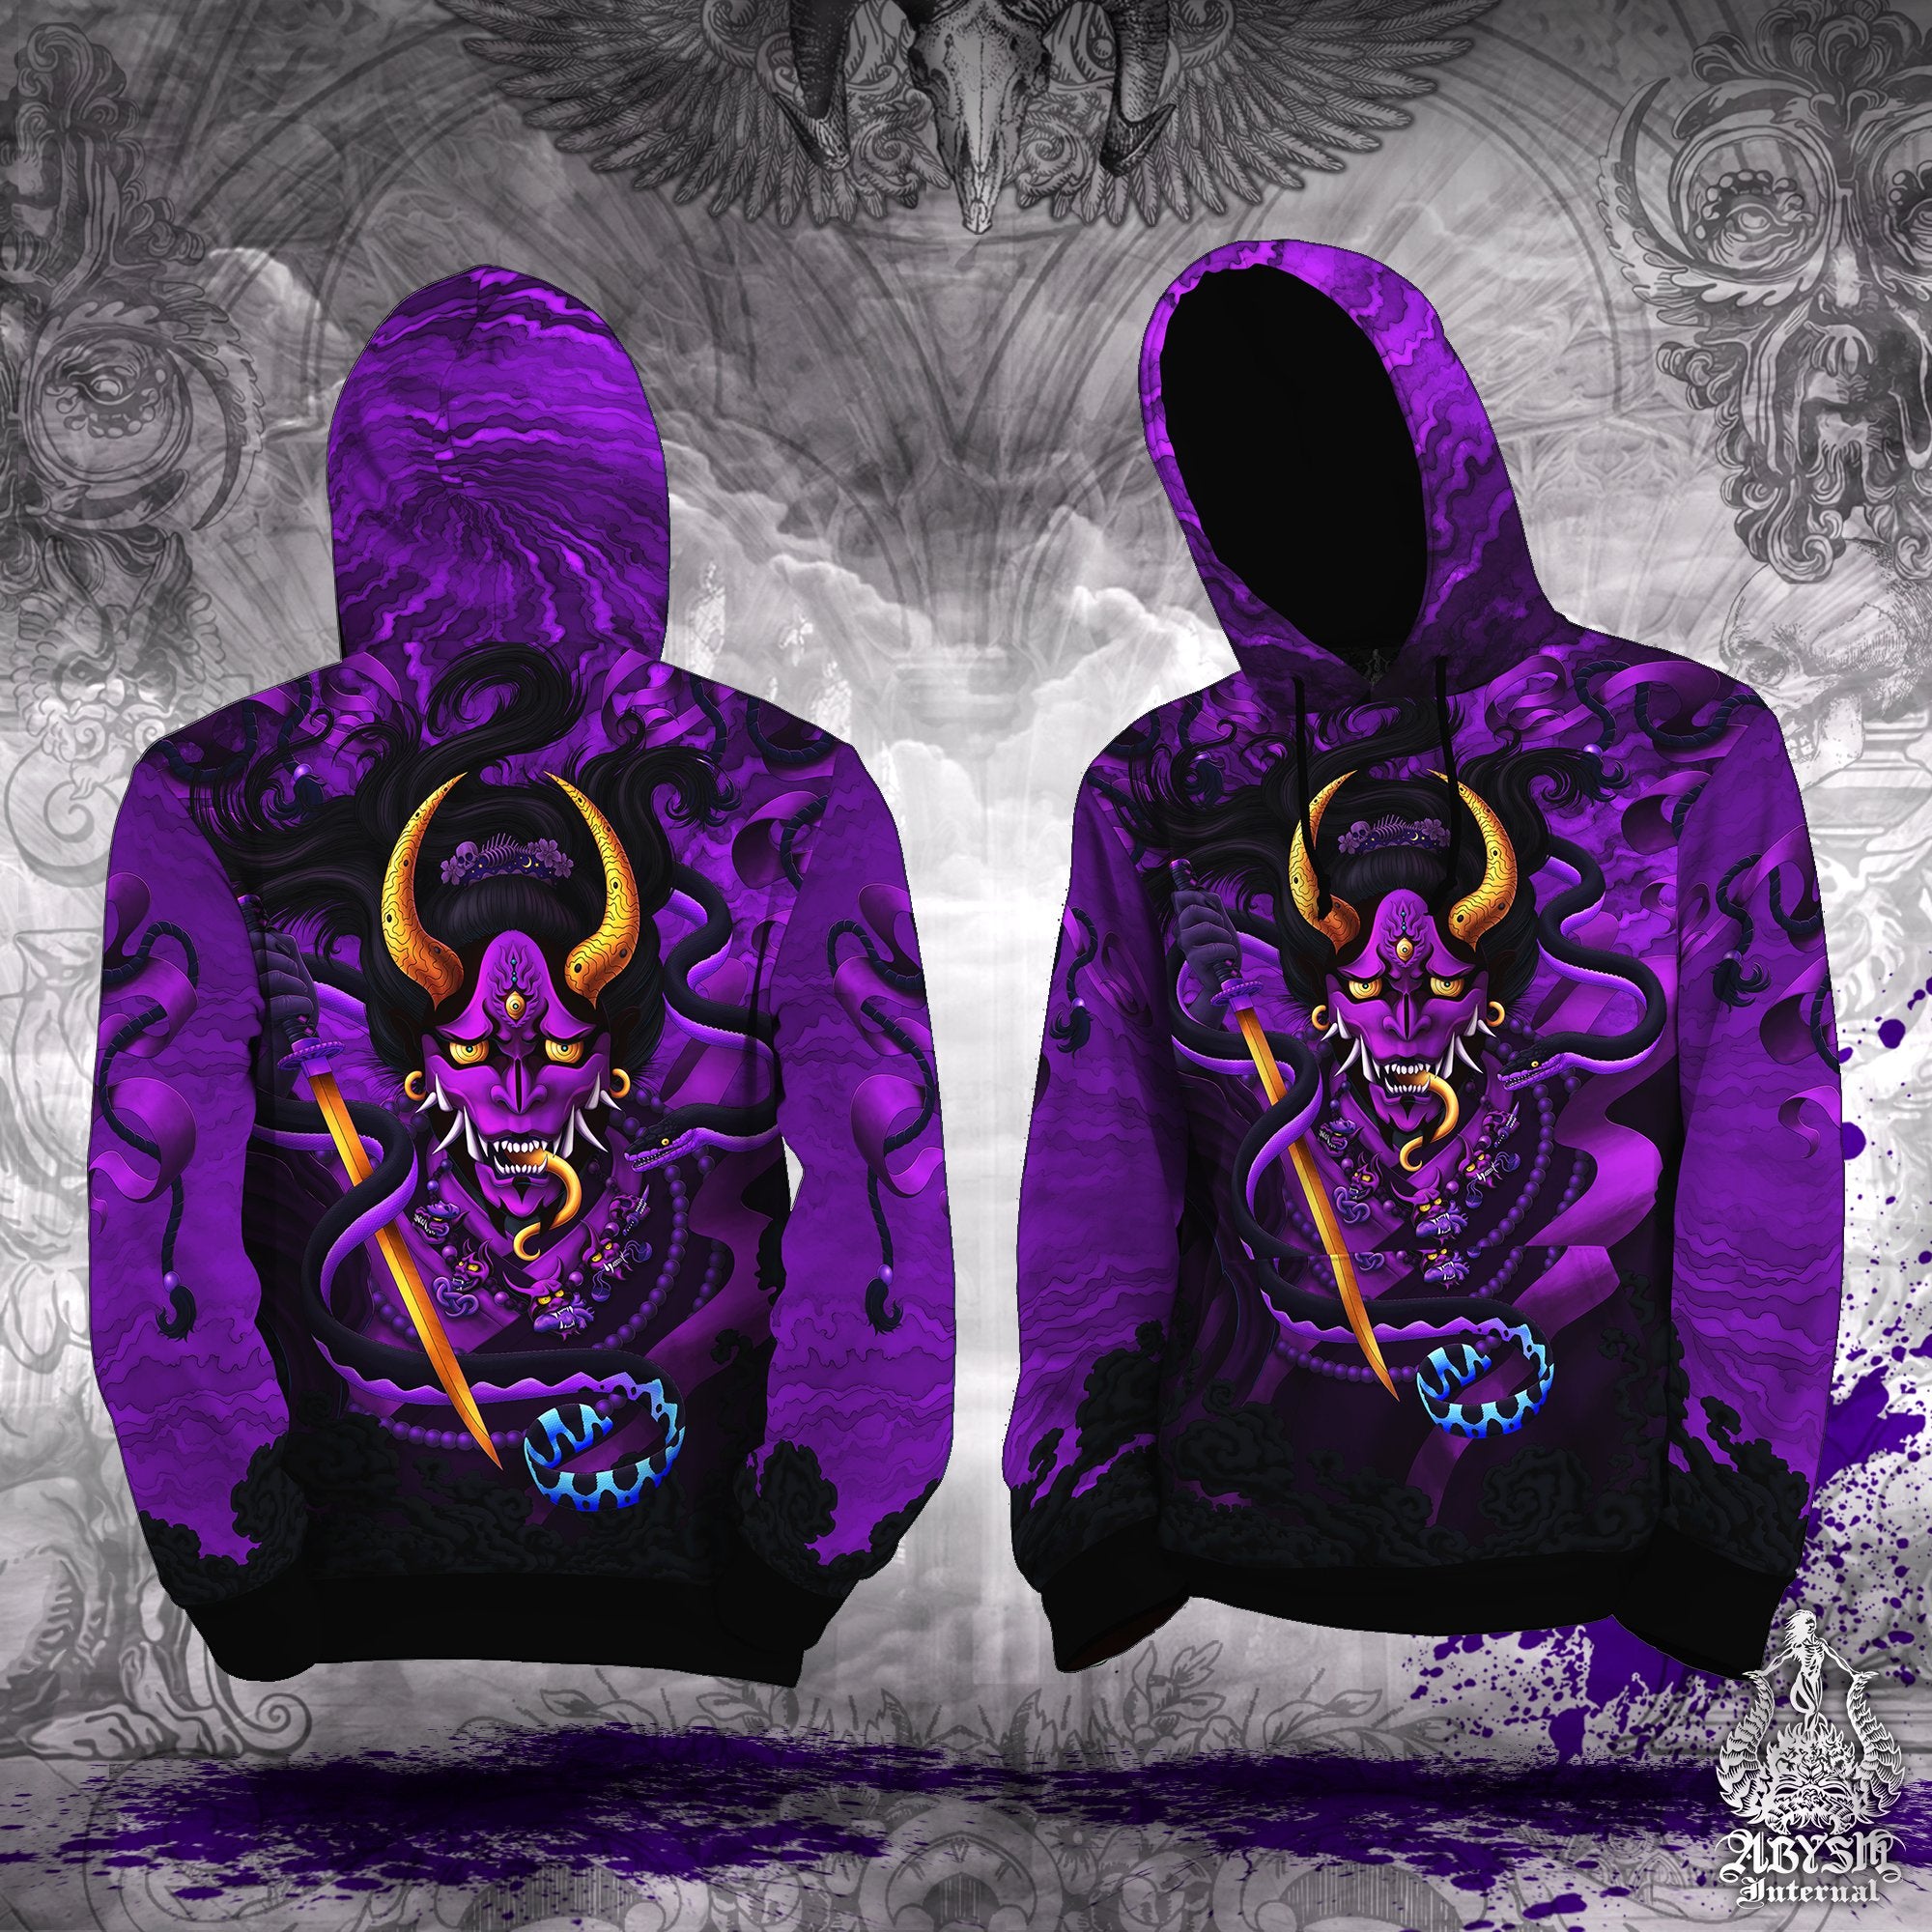 Graffiti Hoodie, Japanese Demon Sweater, Anime and Manga Streetwear, Oni and Snake Street Outfit, Pastel Goth Pullover, Alternative Clothing, Unisex - Hannya, Purple and Black - Abysm Internal